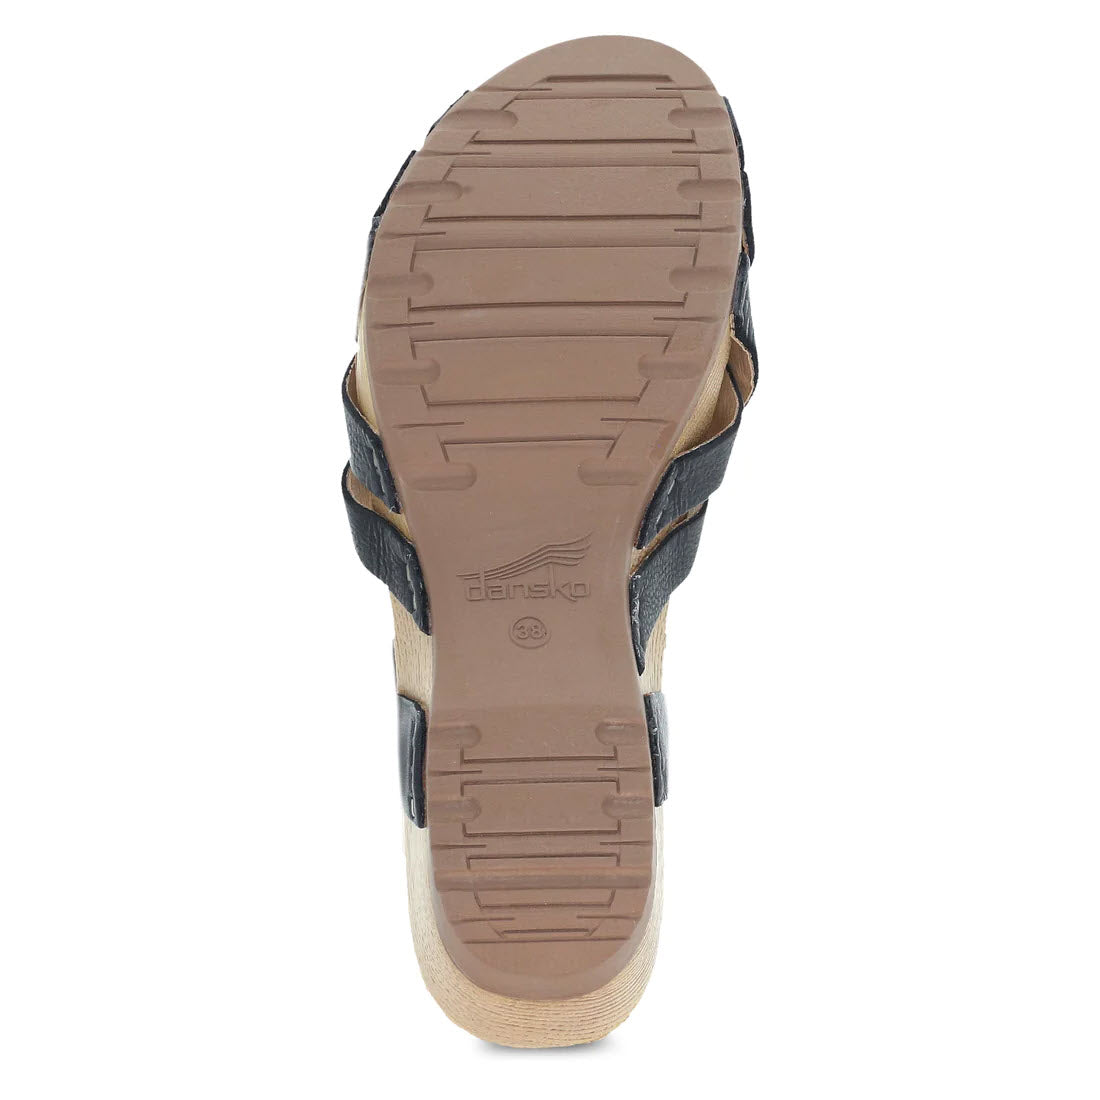 Bottom view of a single Dansko Tinley Black sandal with an adjustable strap and a chunky chic brown rubber sole, displaying the brand logo.